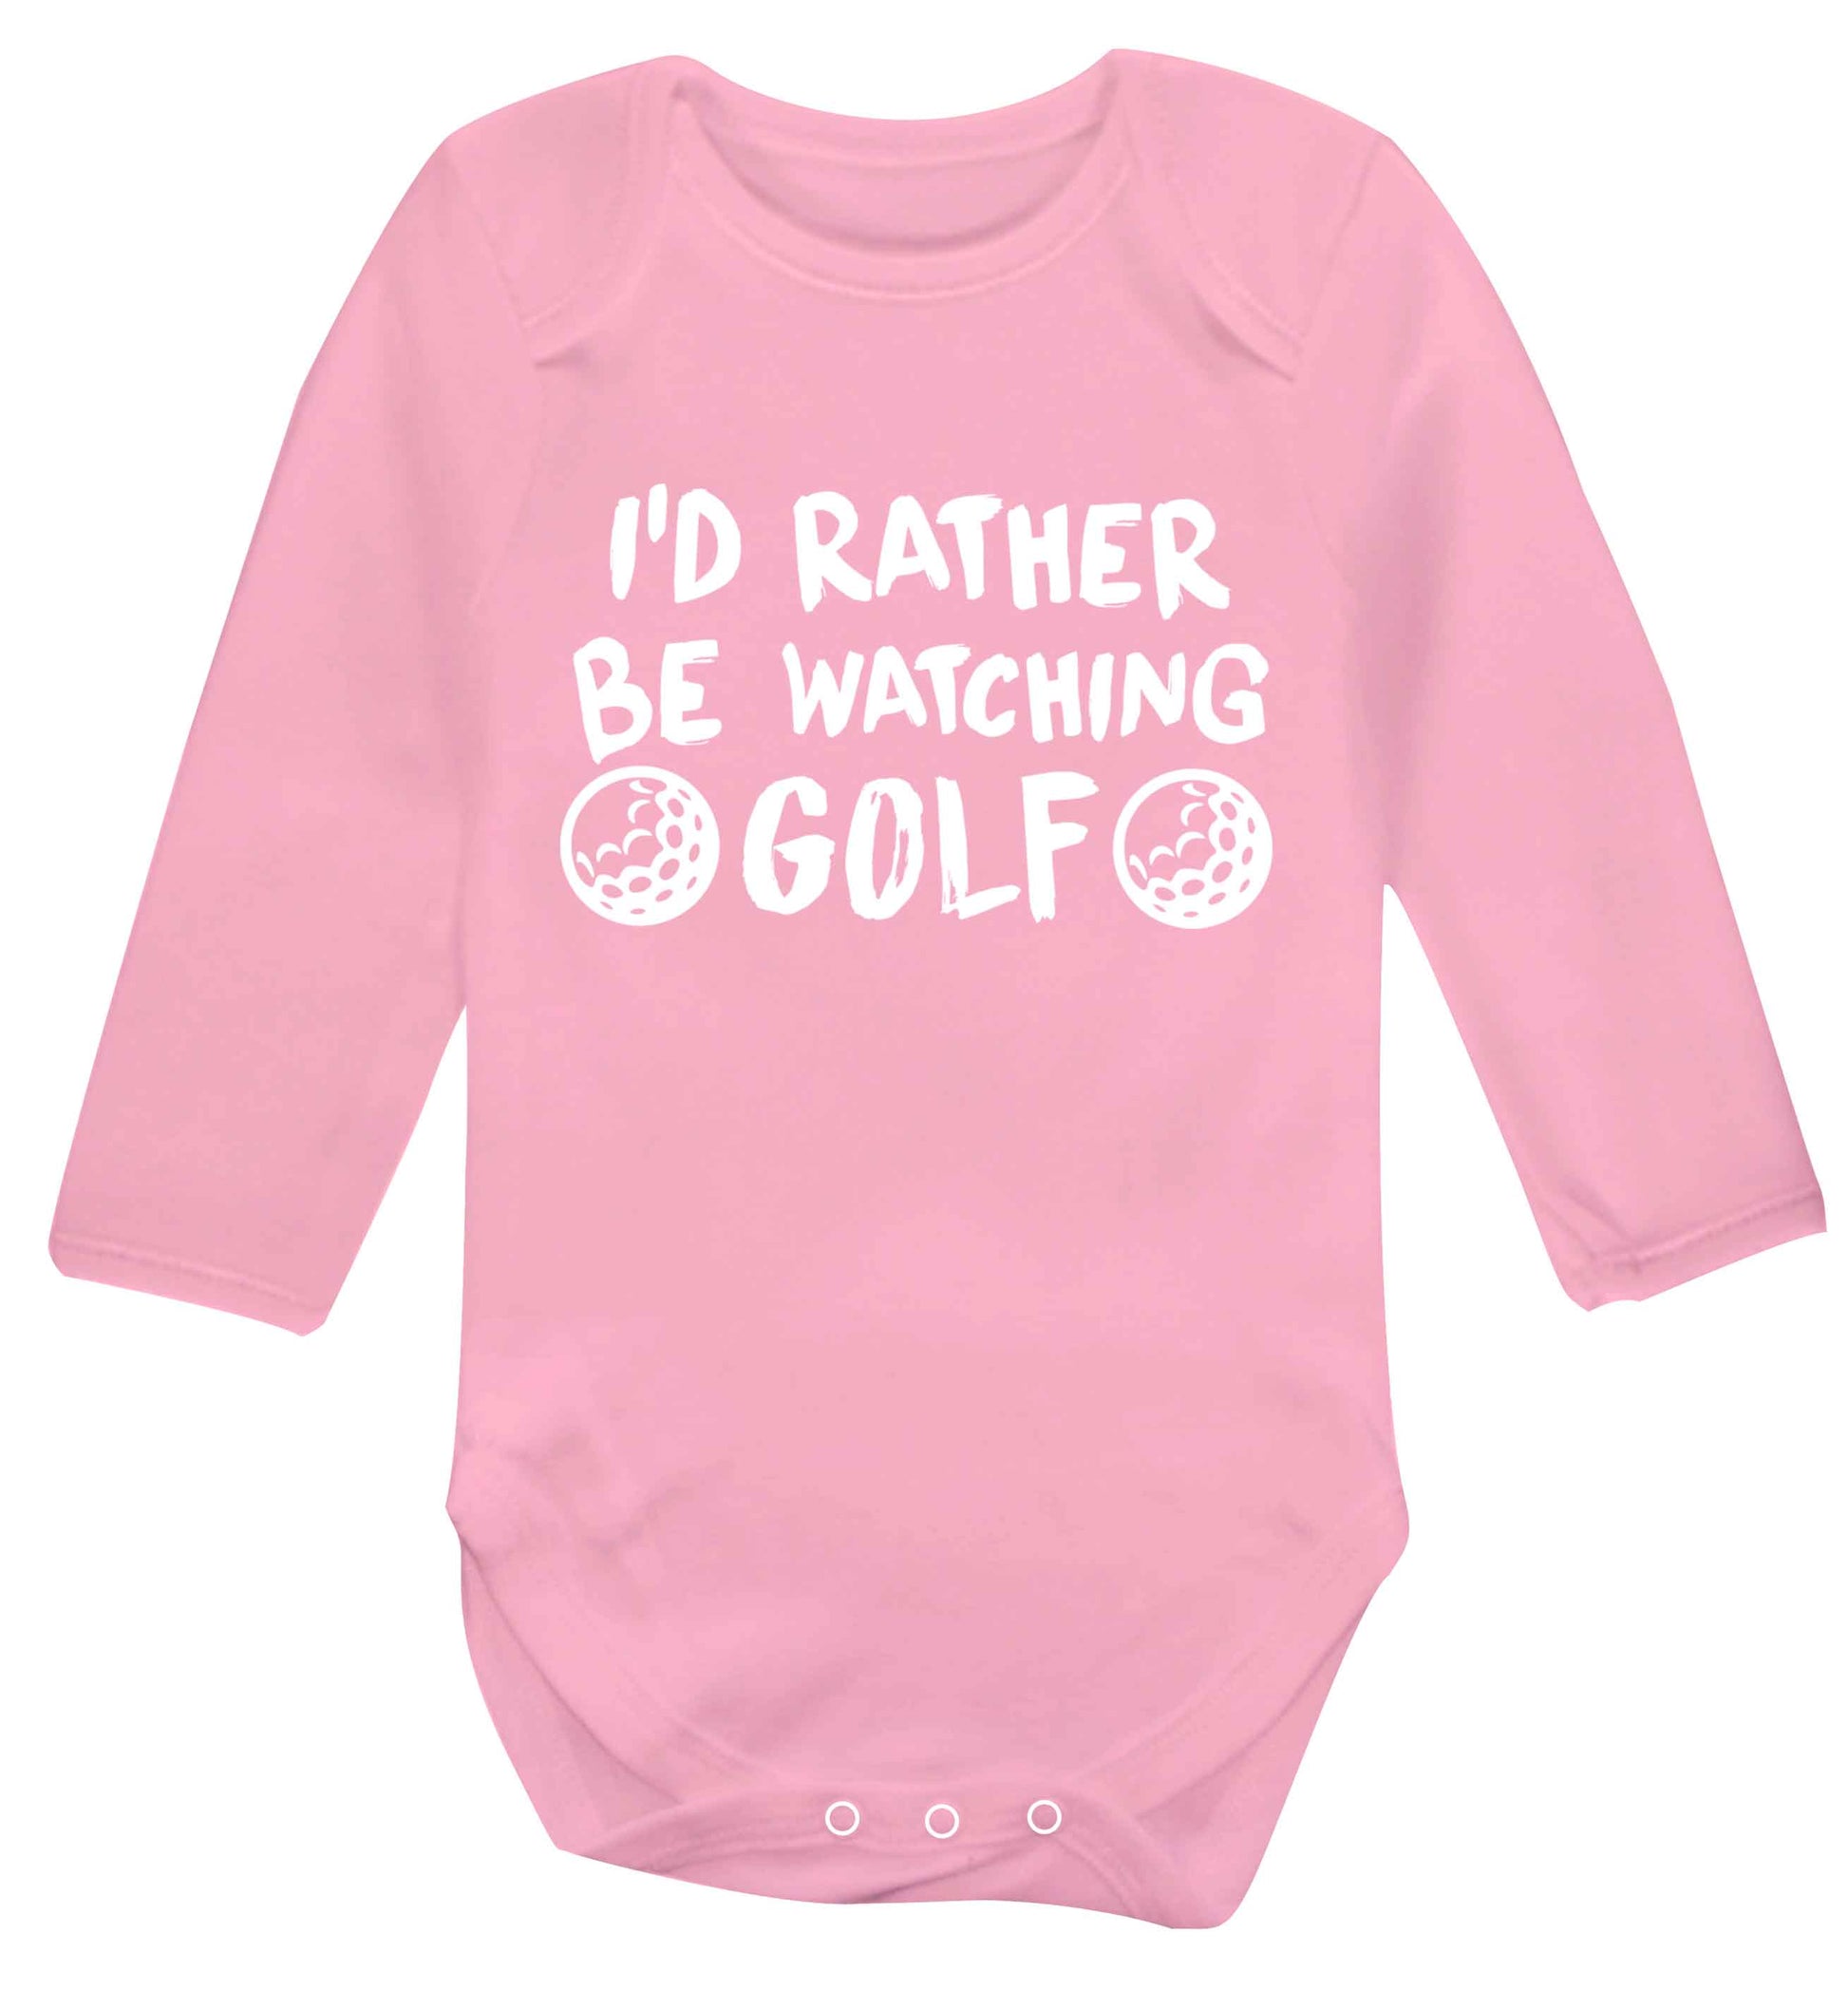 I'd rather be watching golf Baby Vest long sleeved pale pink 6-12 months